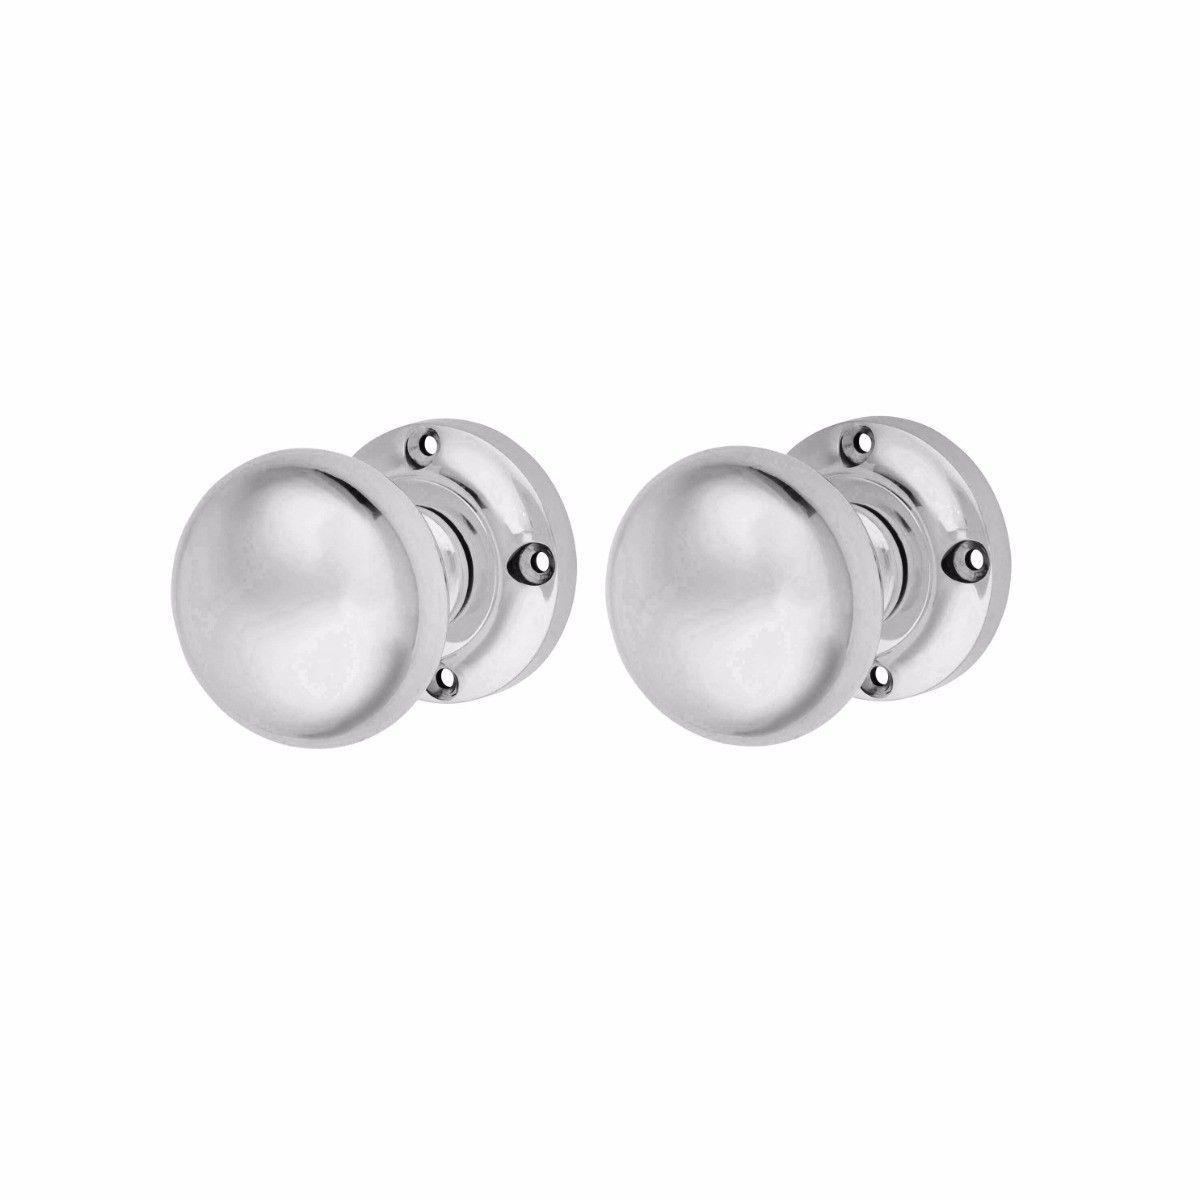 Vic Mortice Knob Chromed 1 Pair With Screws Home Diy 0929 (Parcel Rate)